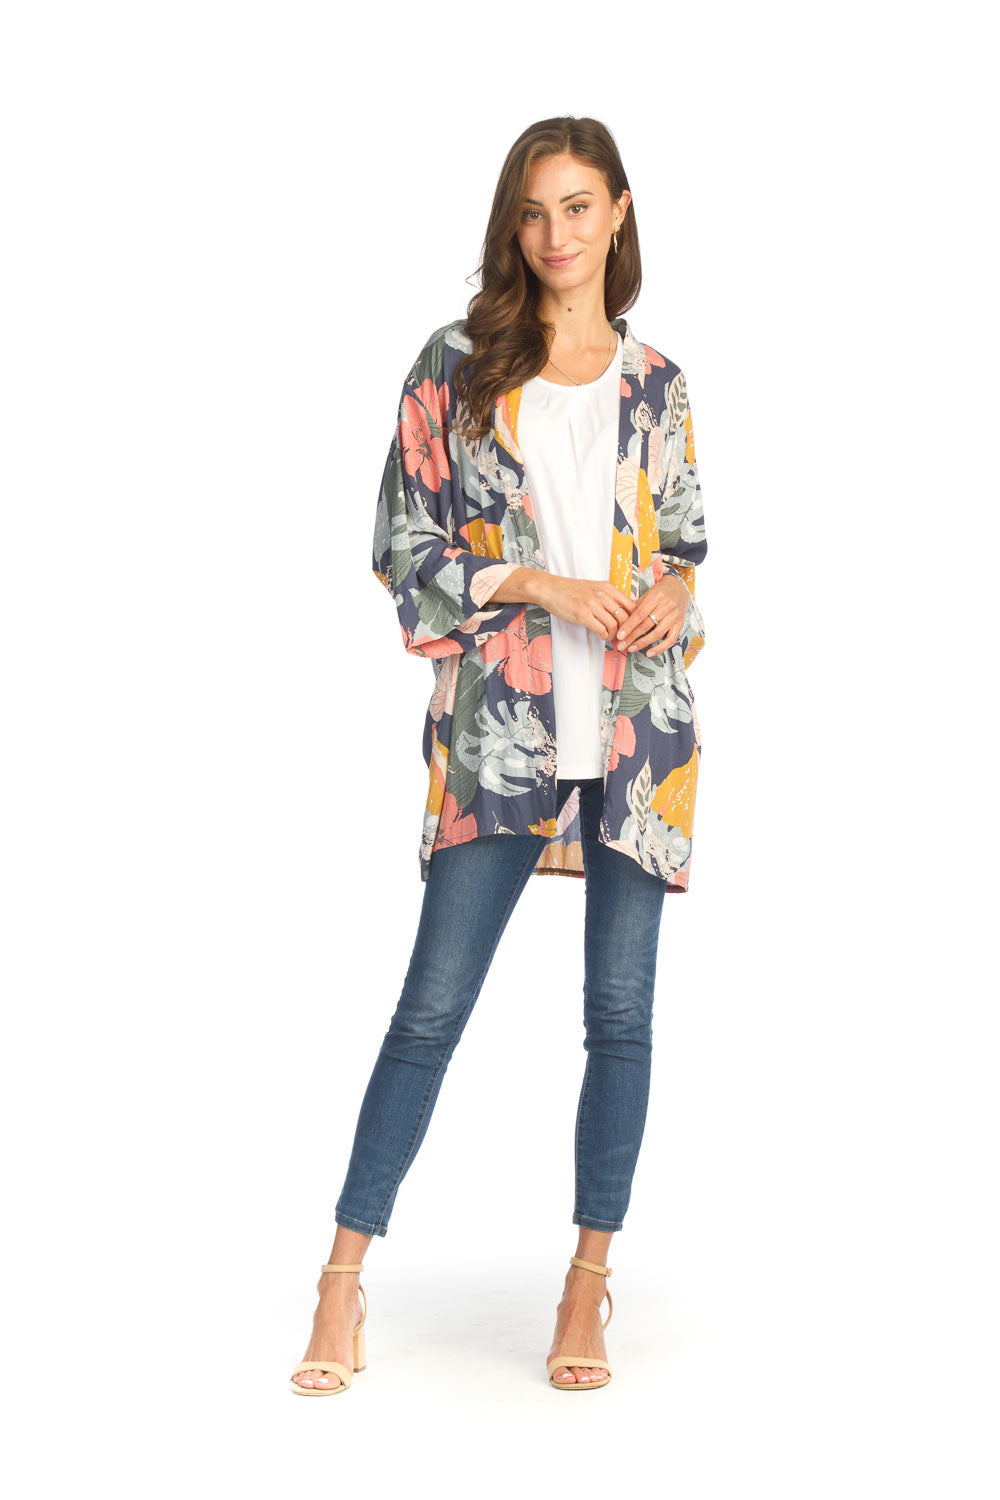 PT-14130 - FLORAL 3/4 SLEEVE COVERUP